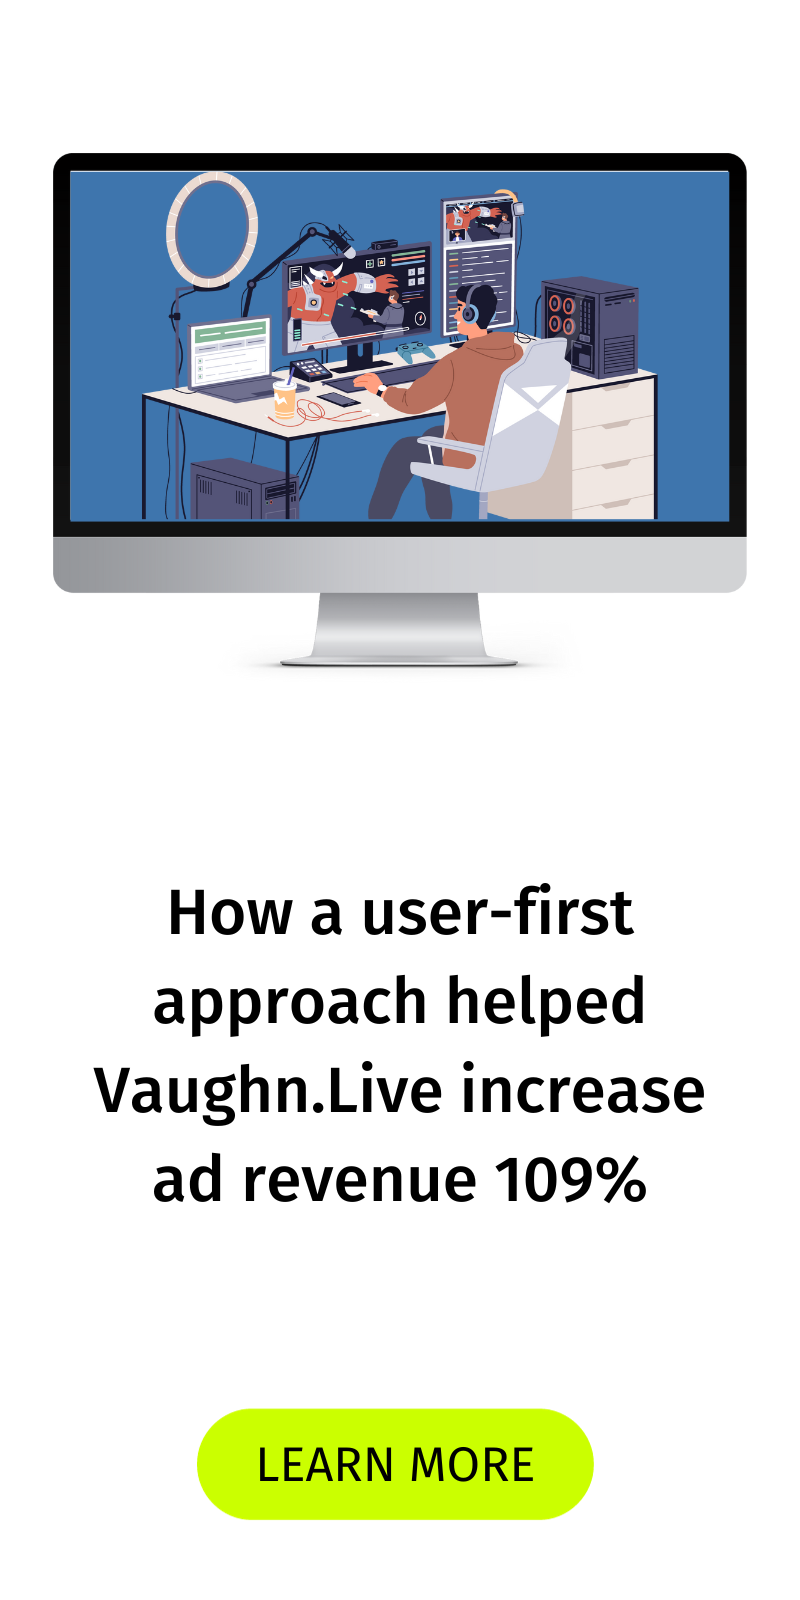 Vaughn.Live Case Study Cover Image